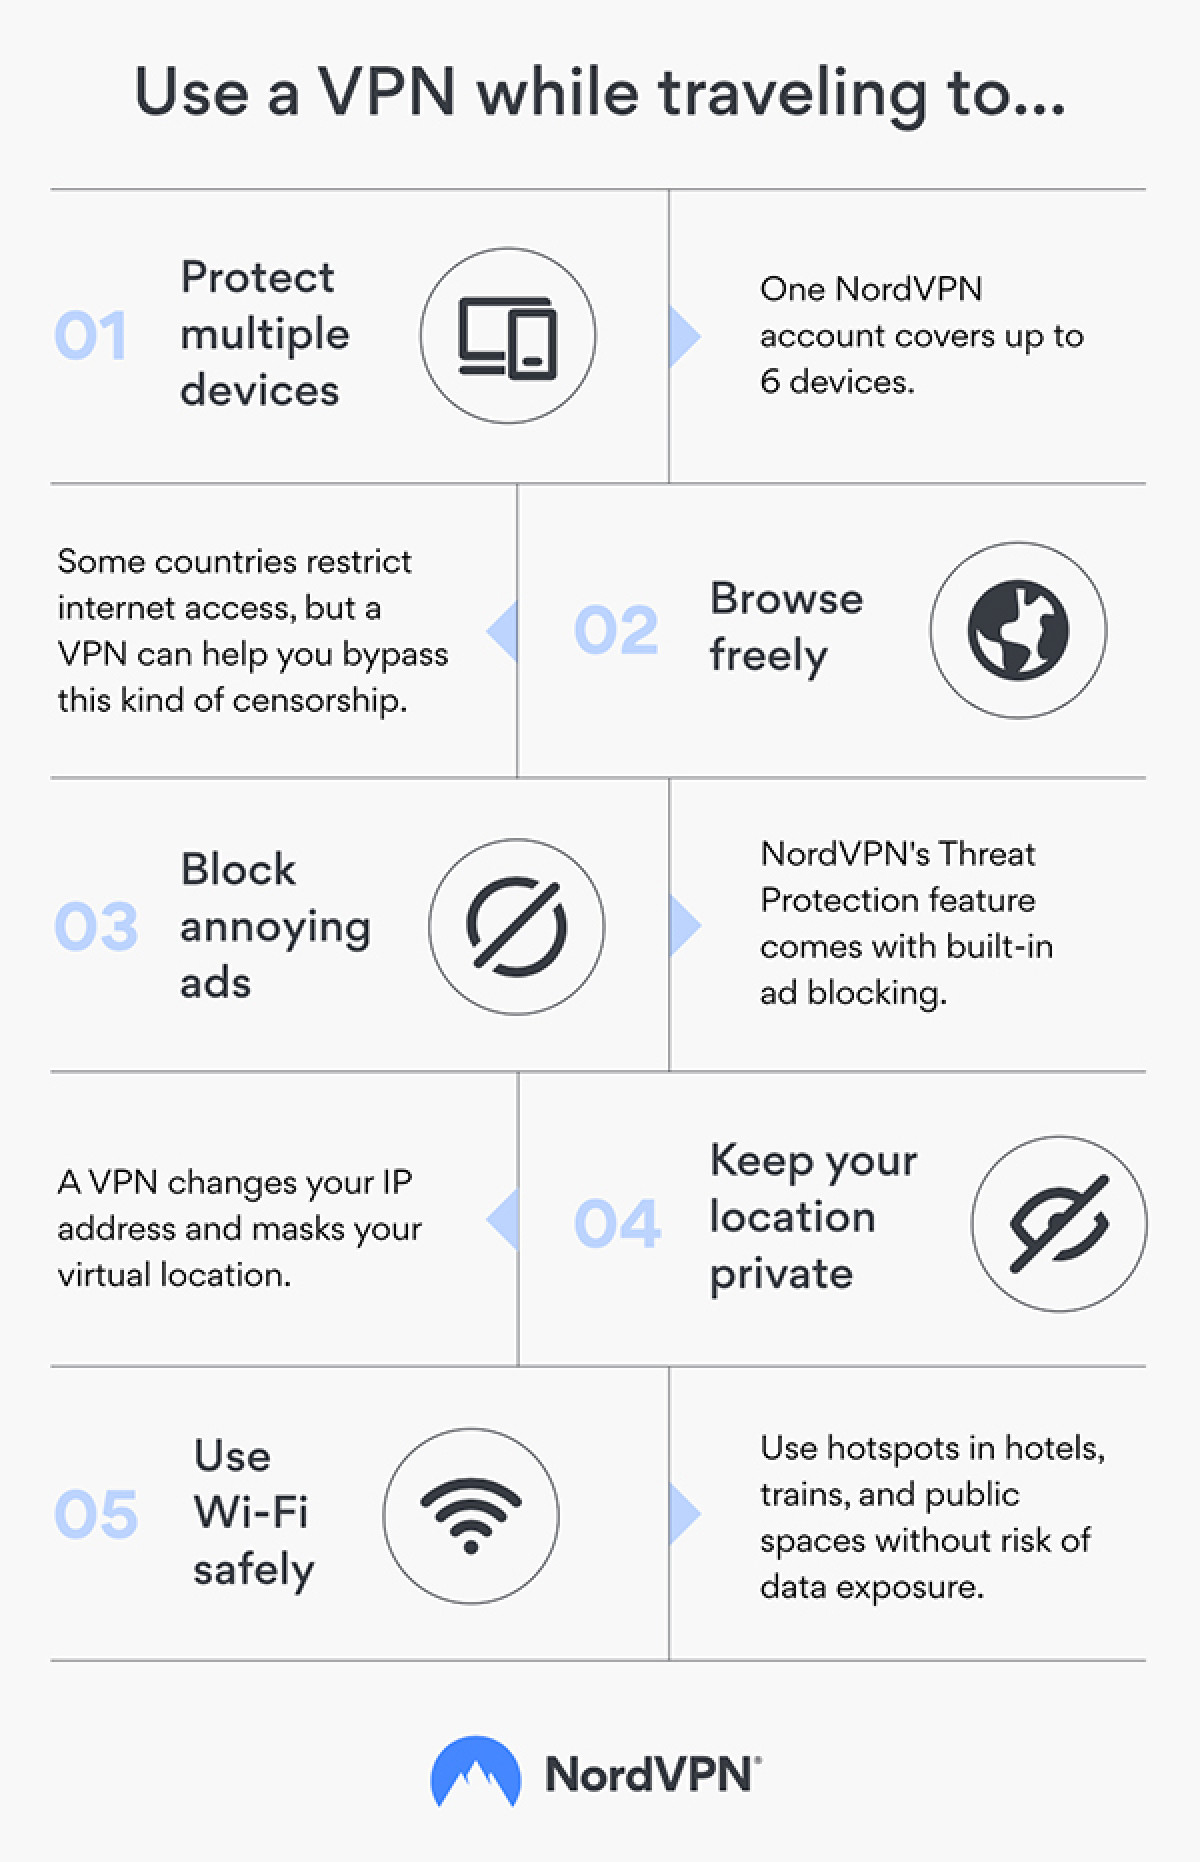 Why you should use a VPN while traveling according to NordVPN. (Source: nordvpn.com)